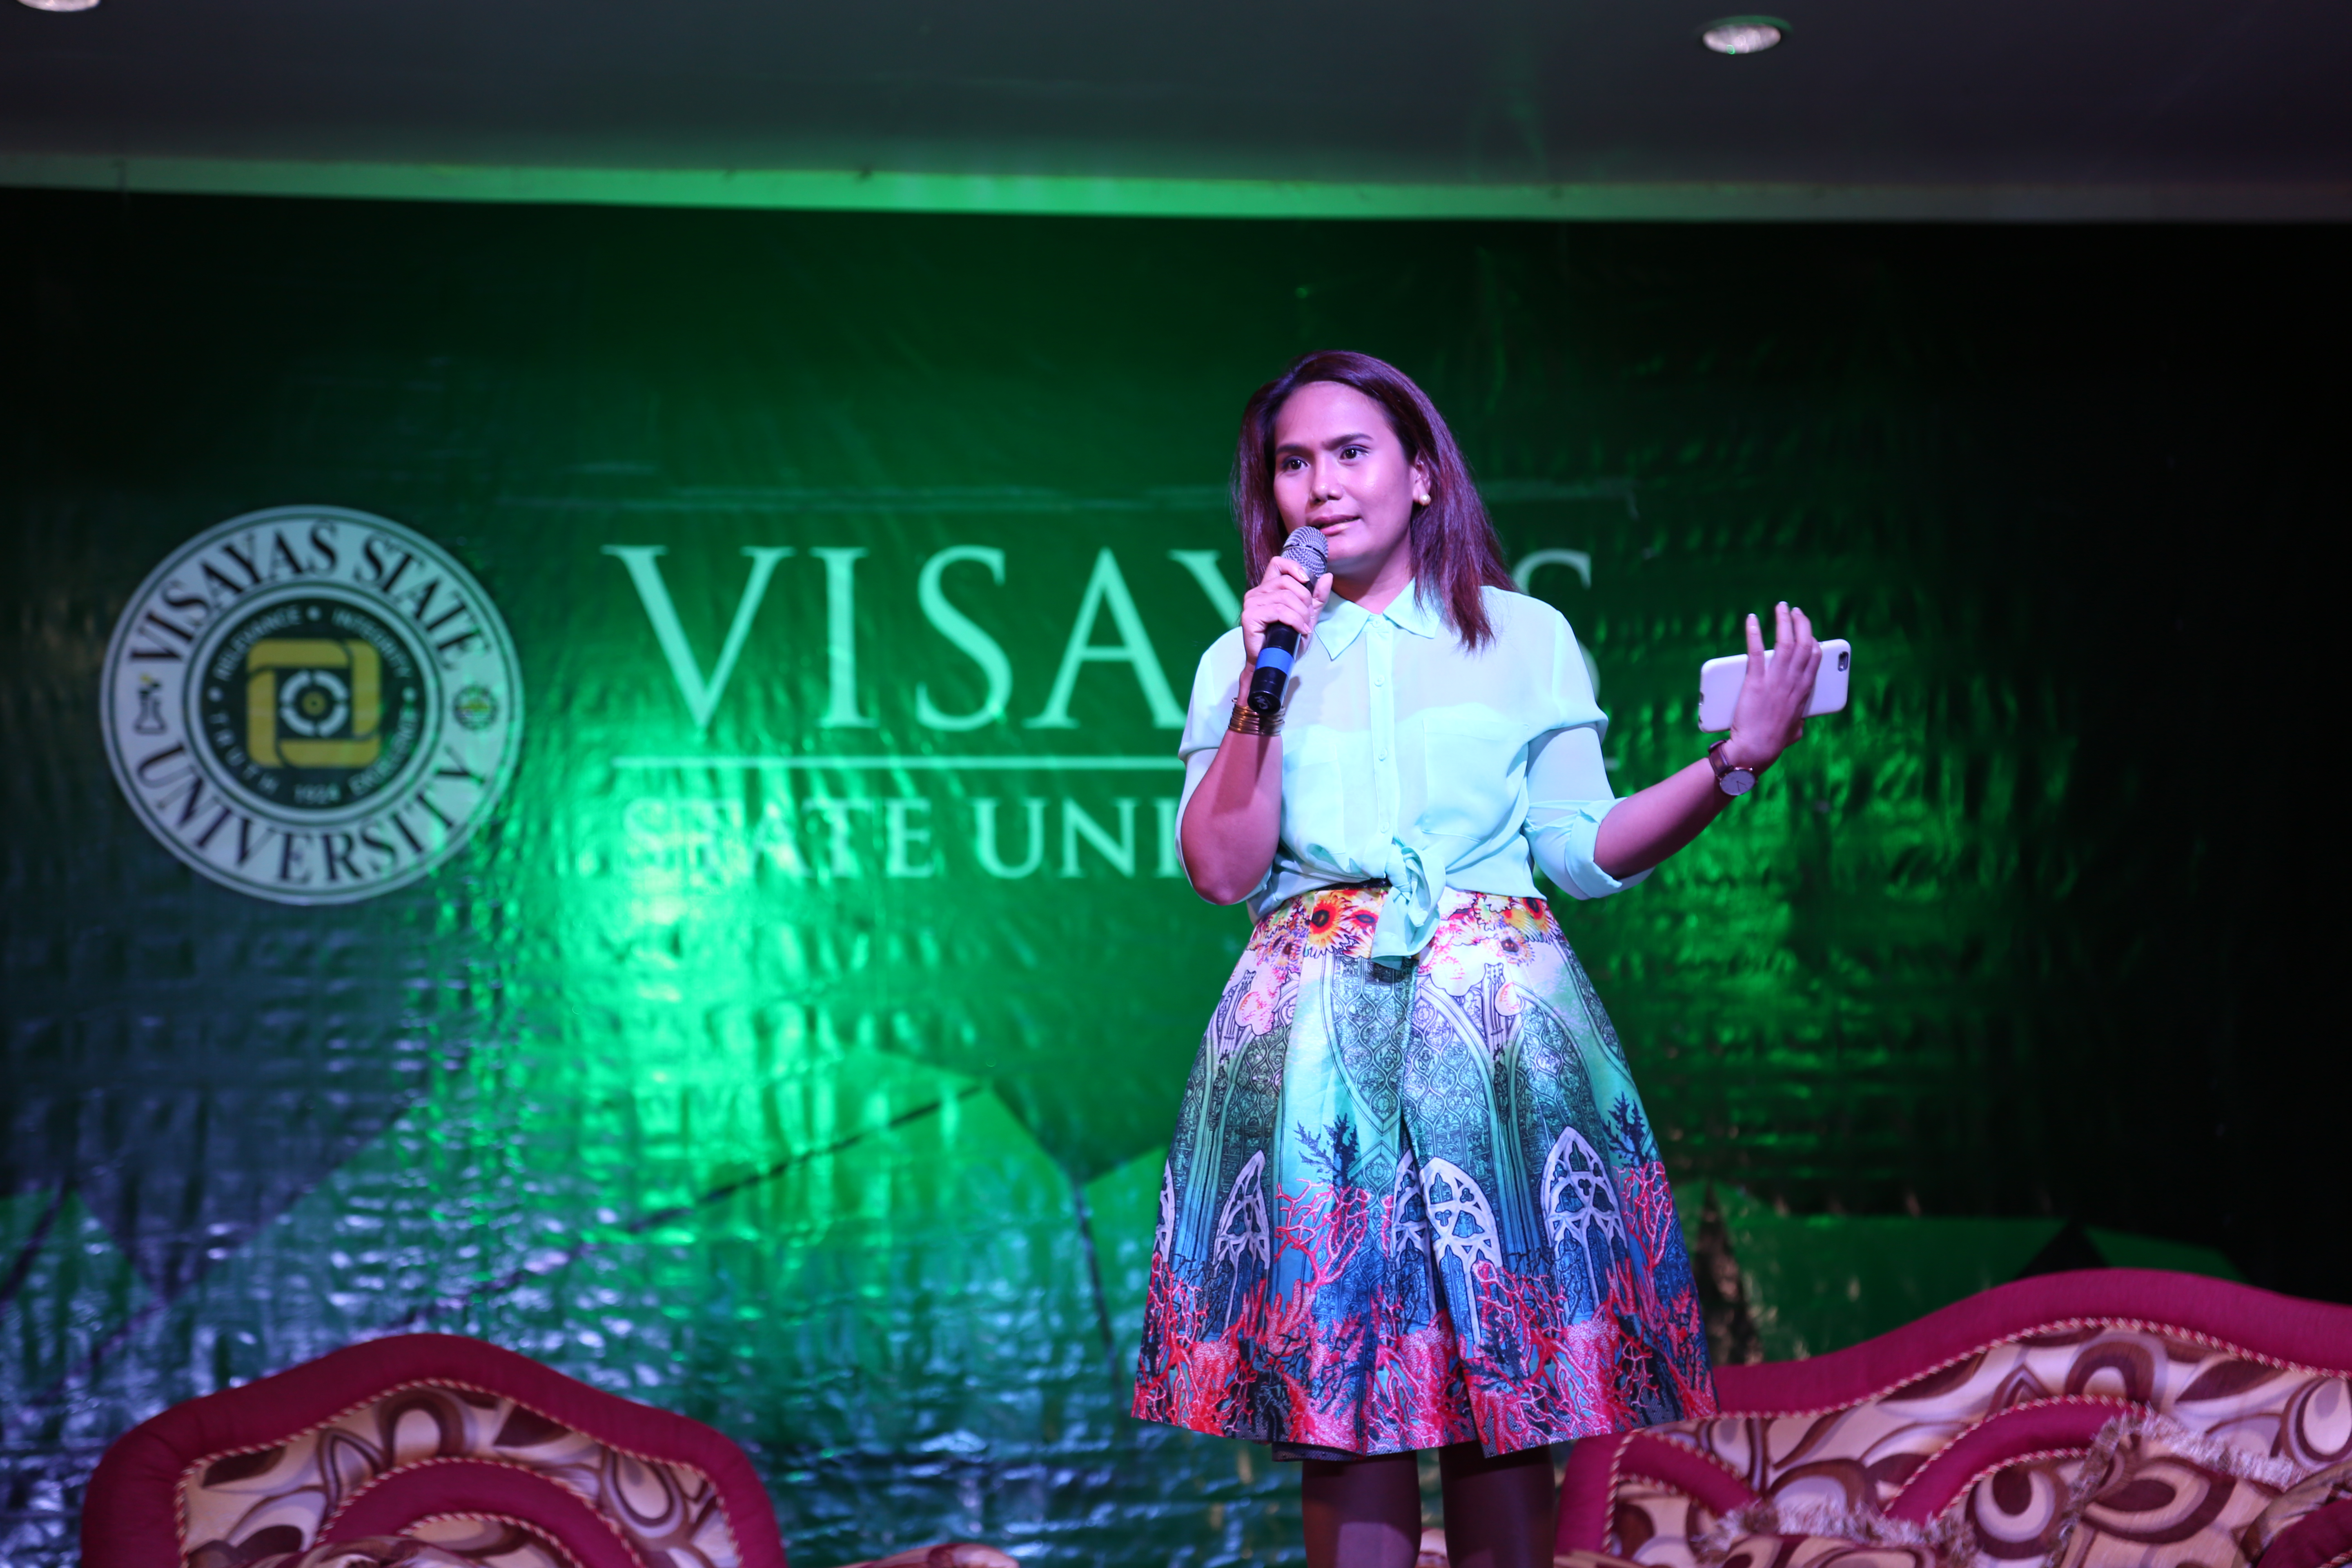 8 LIFE LESSONS. Cherrie Atilano sharing her eight life lessons to more than 600 Viscans during the Leadership and Civic Engagement Forum, held at VSU Convention Center on November 21, 2016.